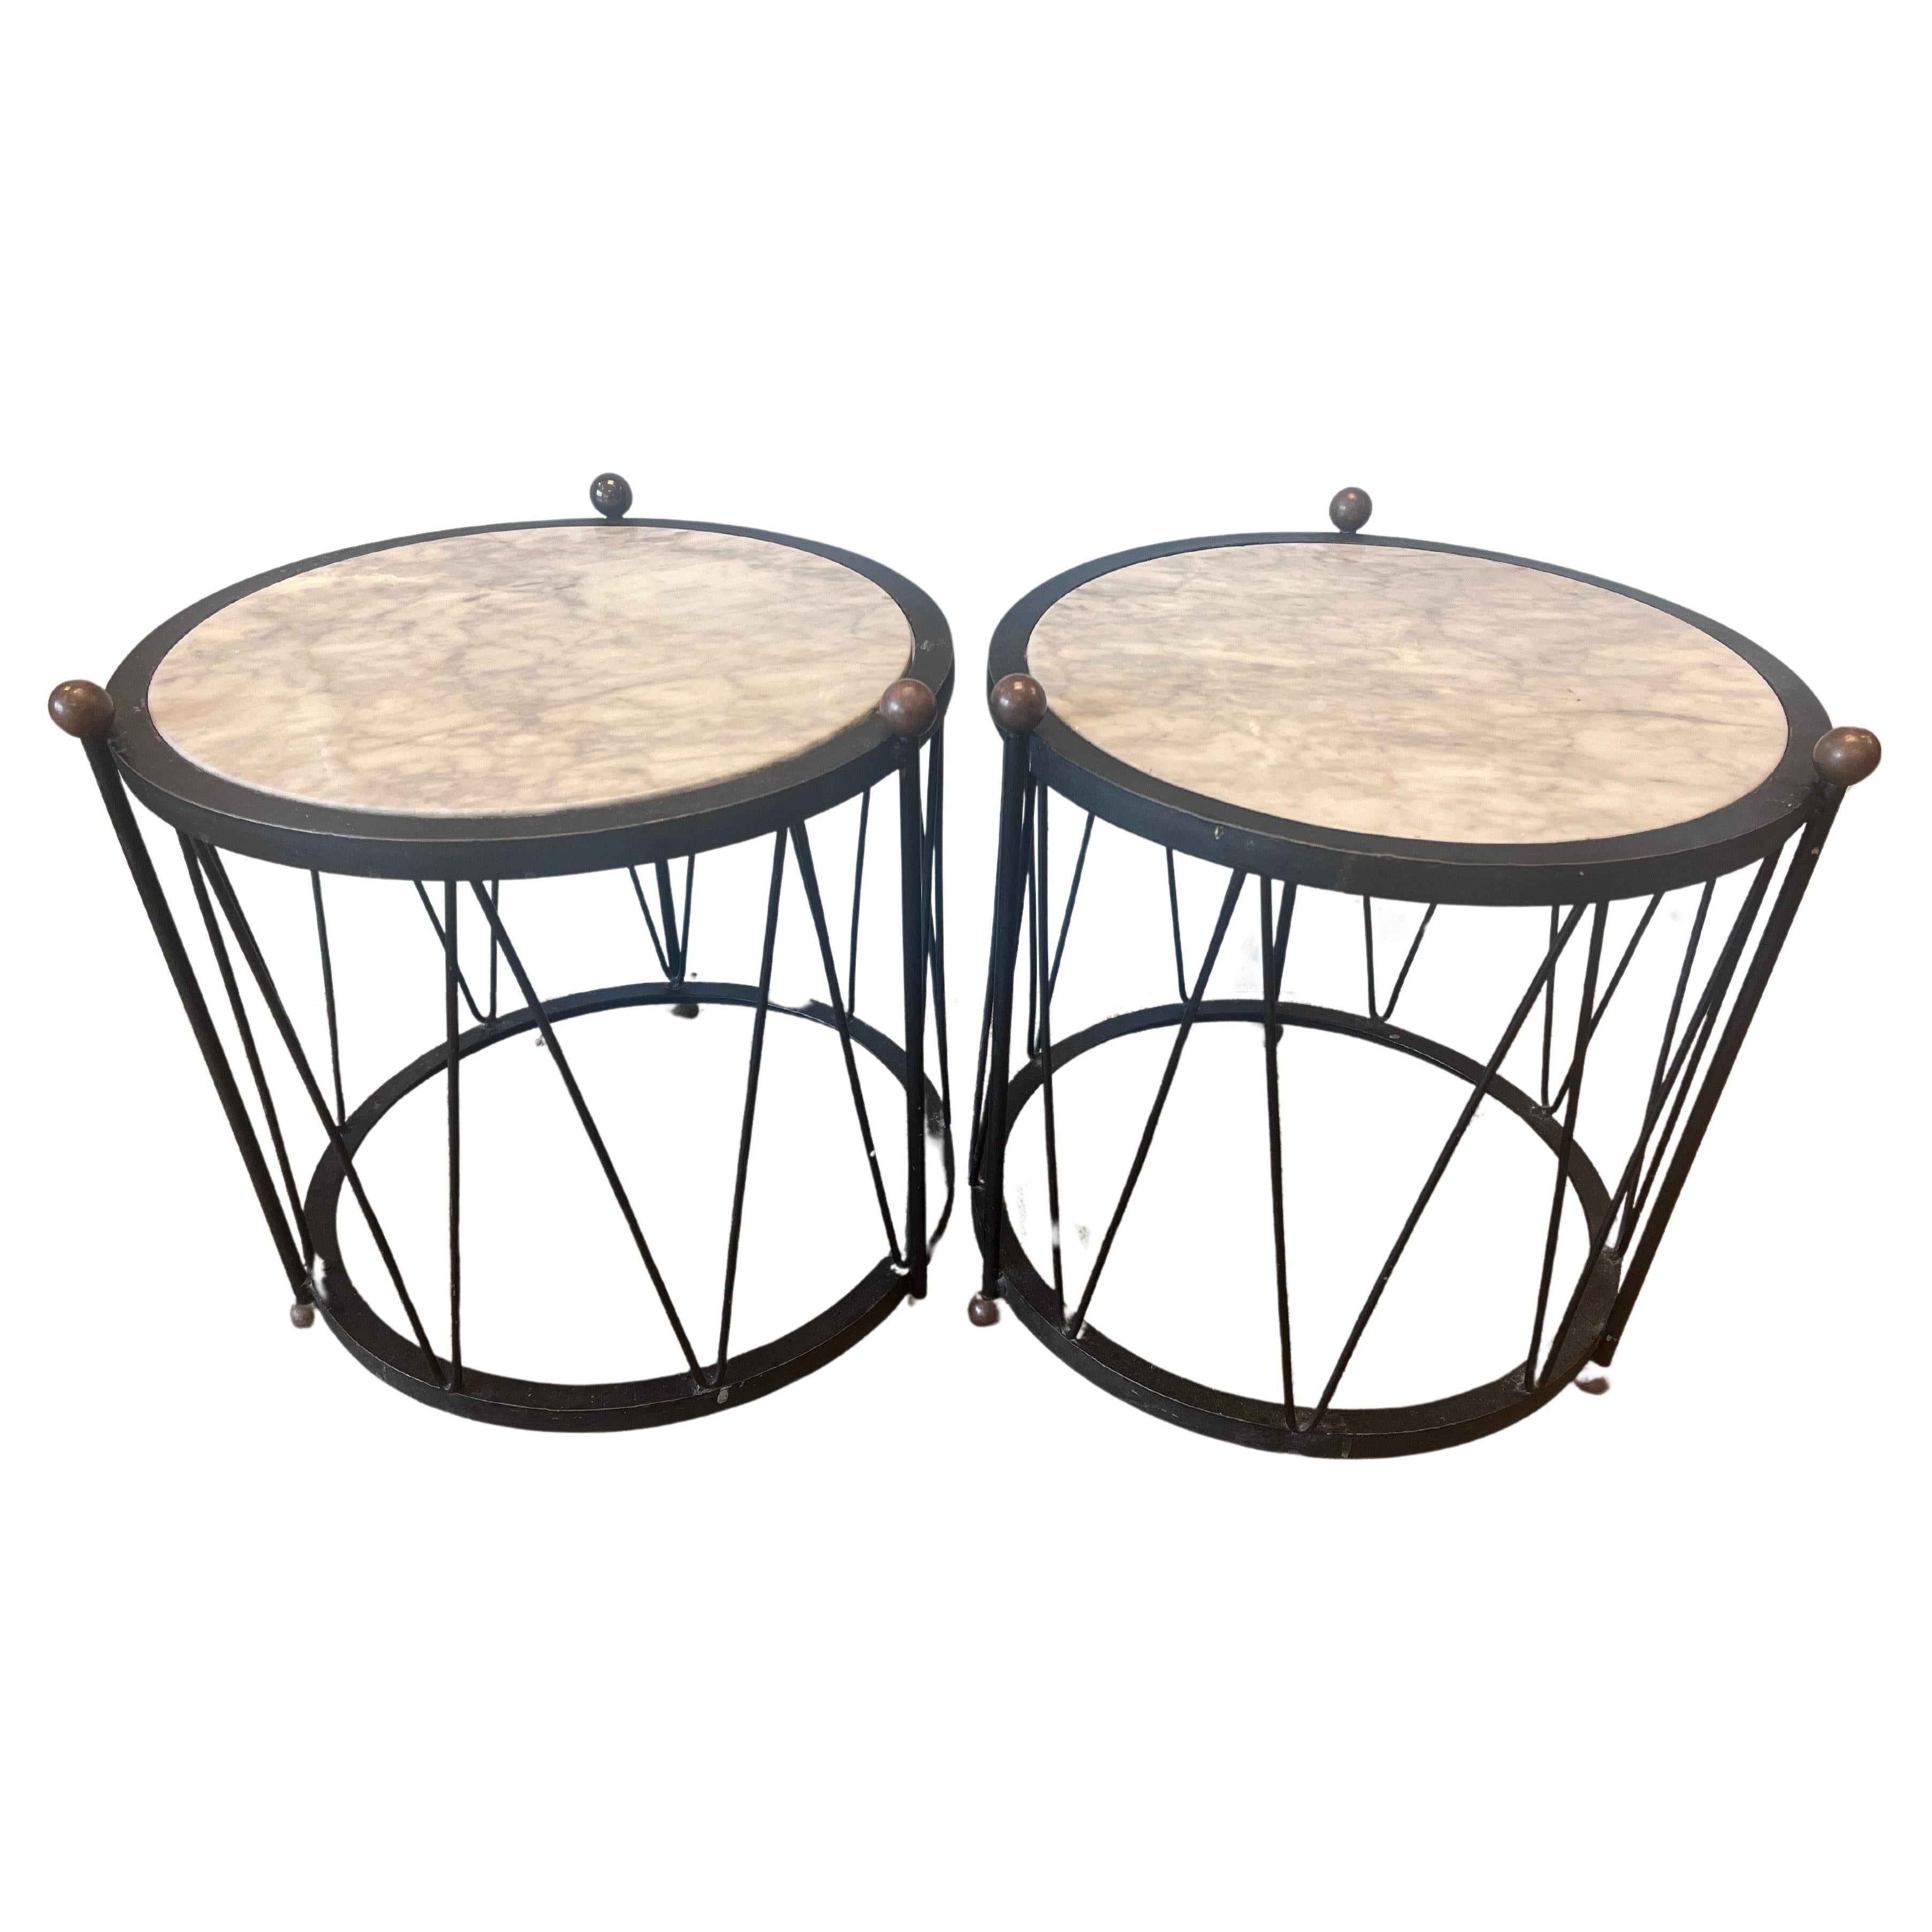 Pair Italian White Marble and Black Iron Drum Side or End Tables with Brass Ball